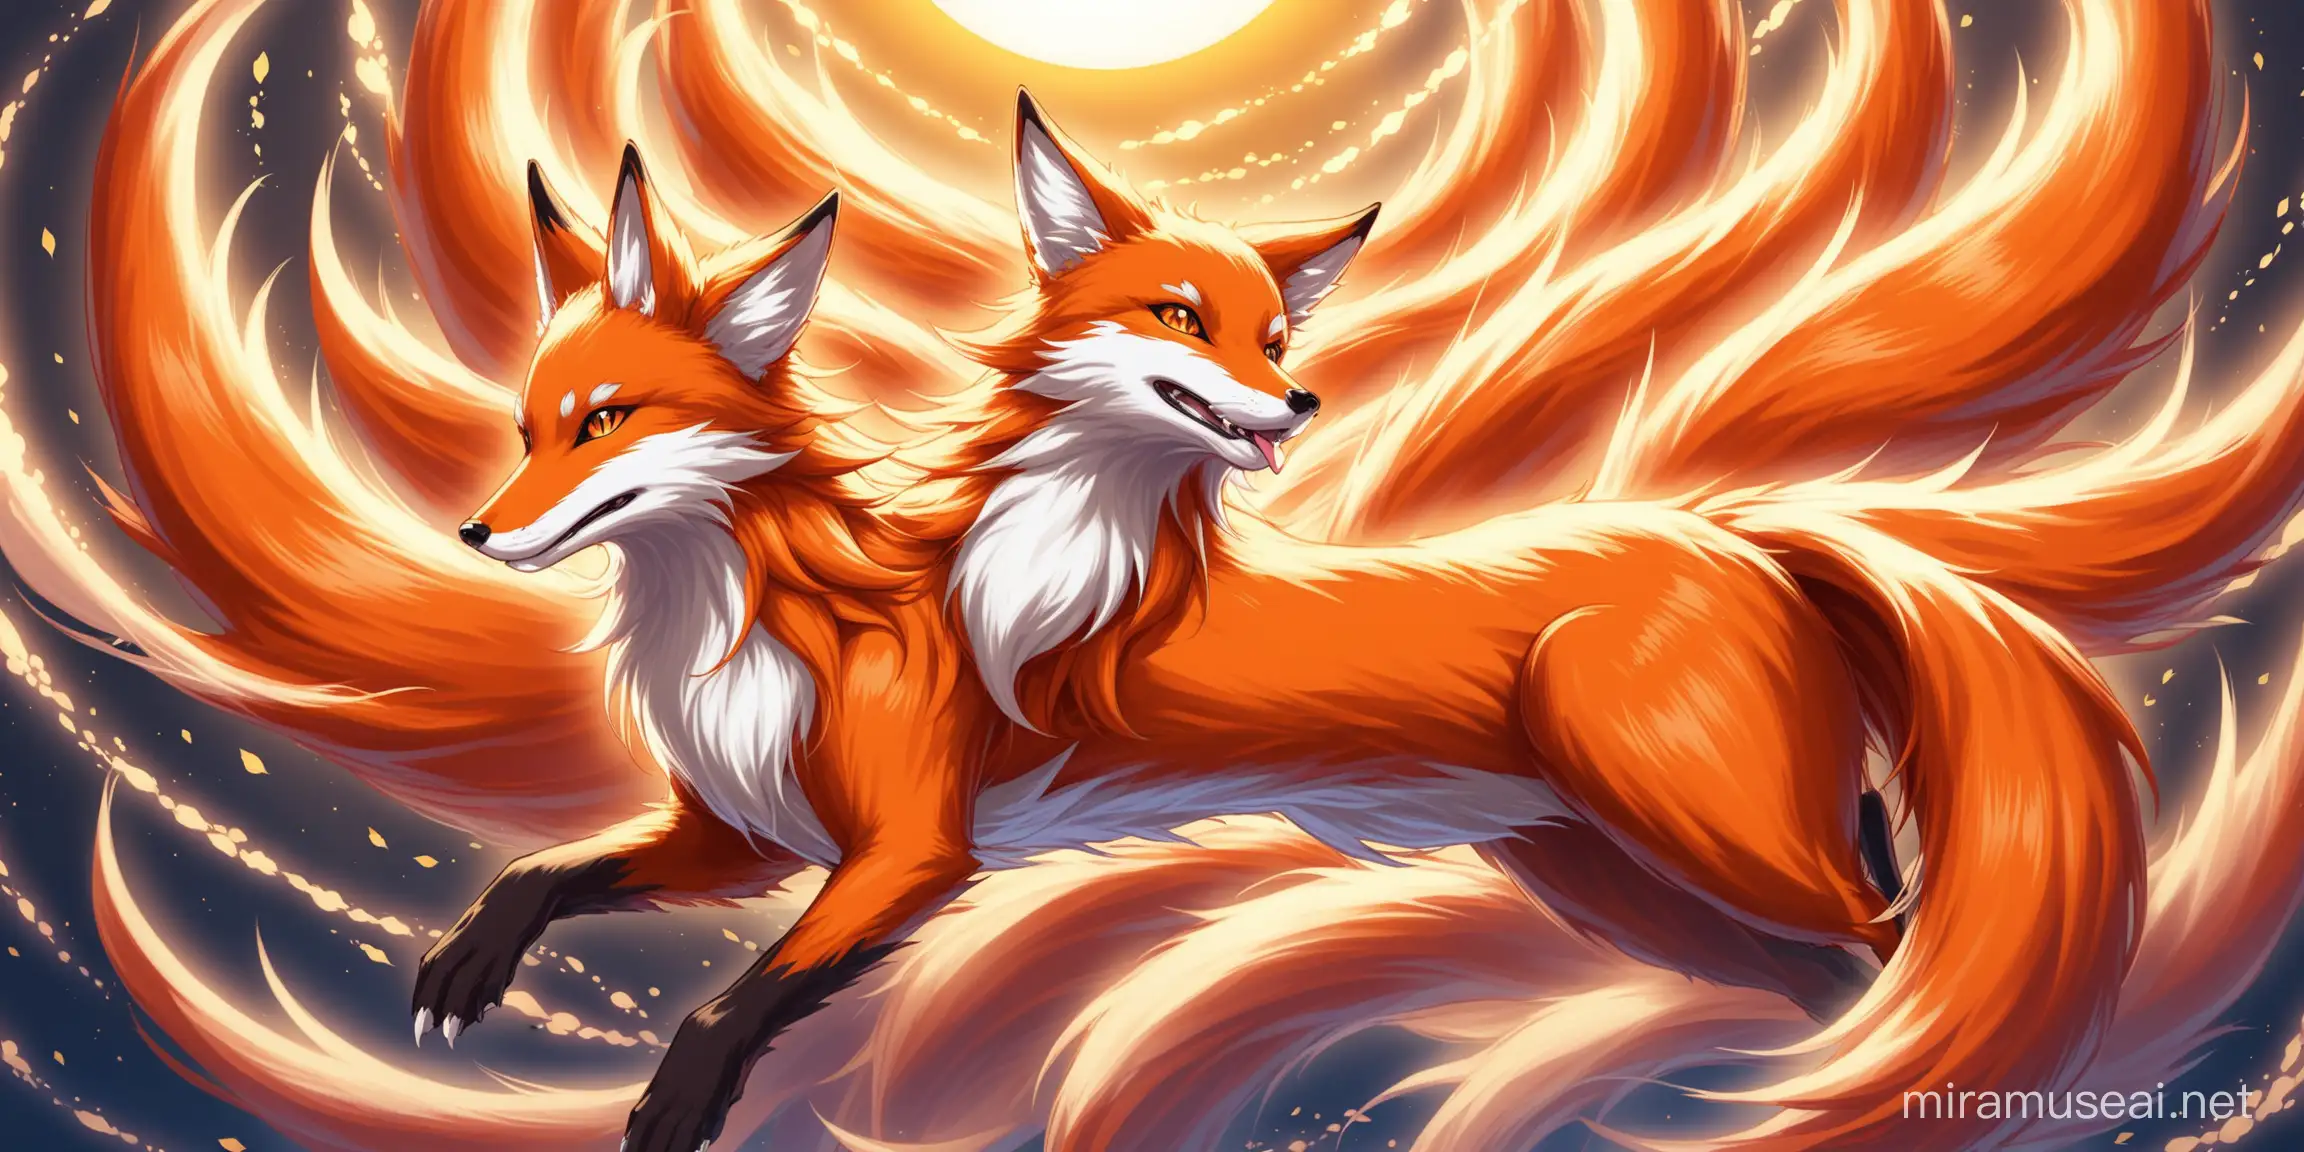 Mystical Encounter with a NineTailed Fox in Enchanted Forest